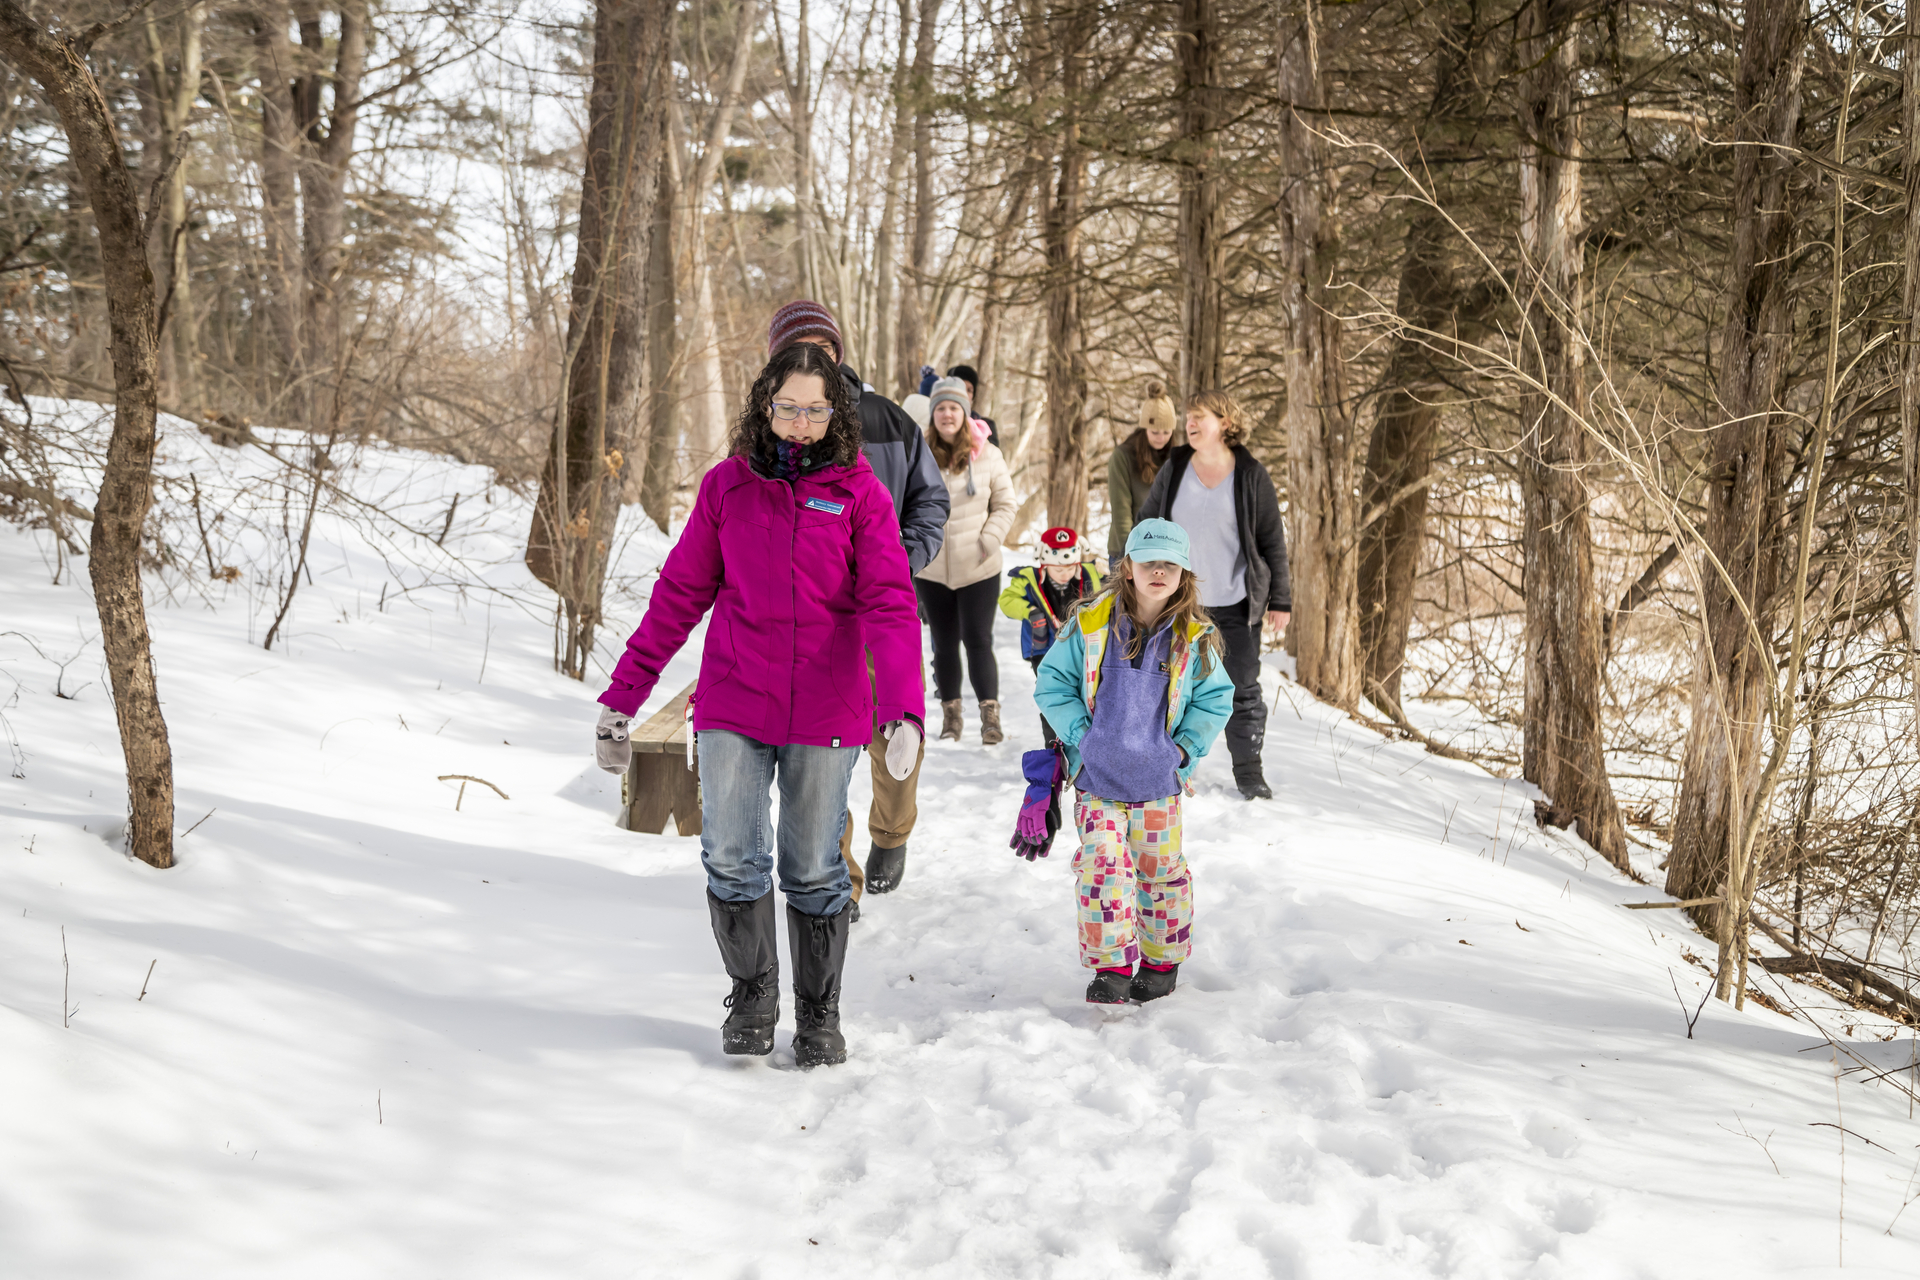 Group of people walking through the snowy woods. A woman in a pink jacket and a young girl with a teal jacket and hat.